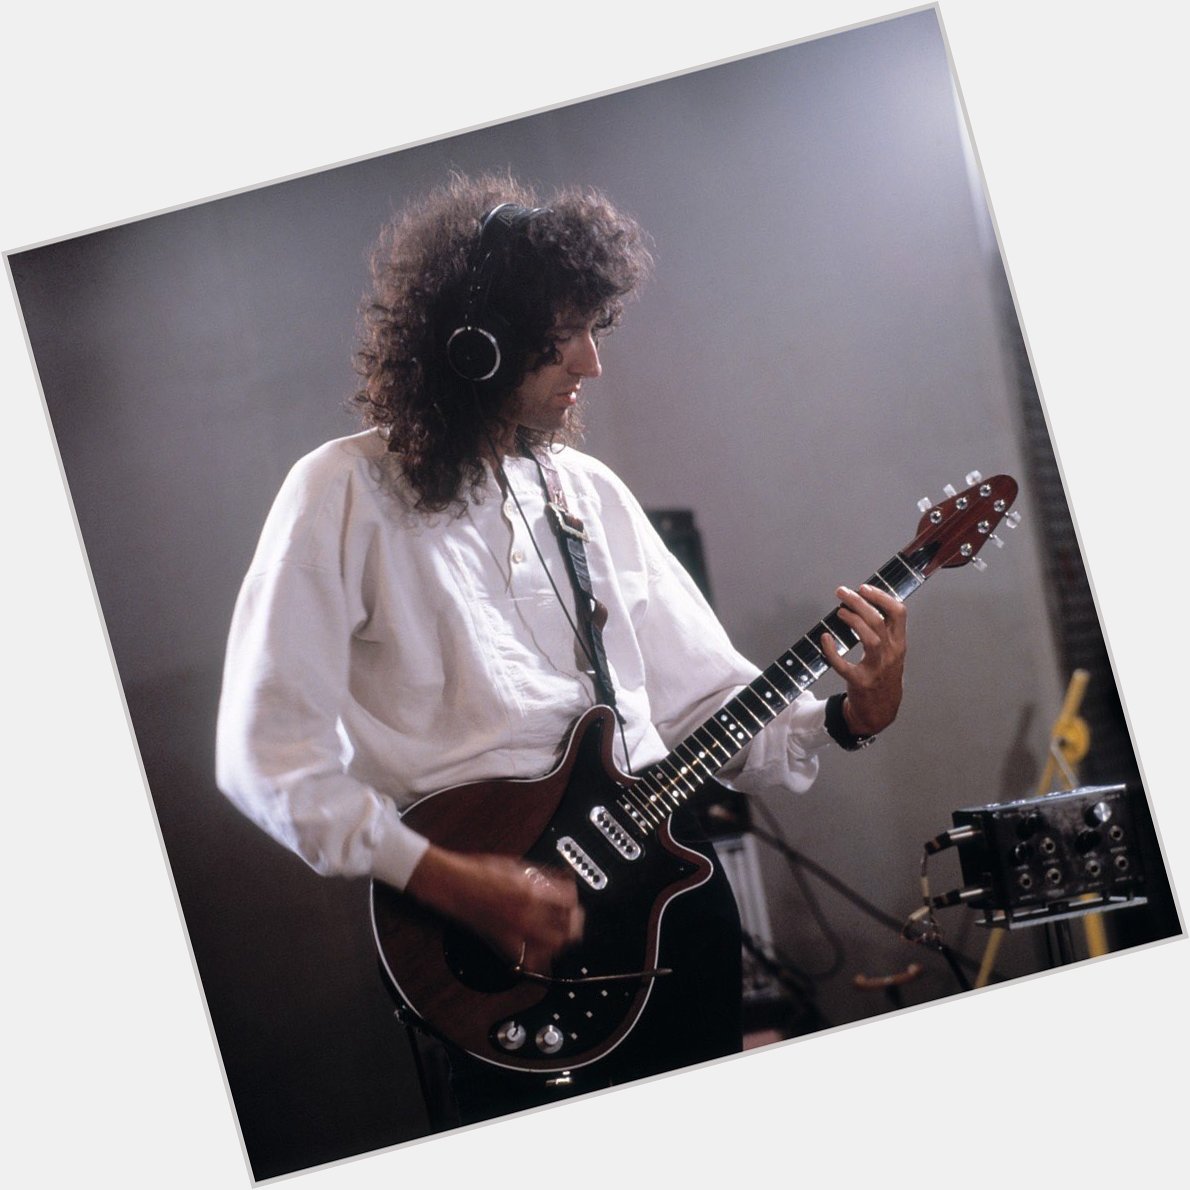 Happy 72nd Birthday the one & only Guitar legend Brian May! 